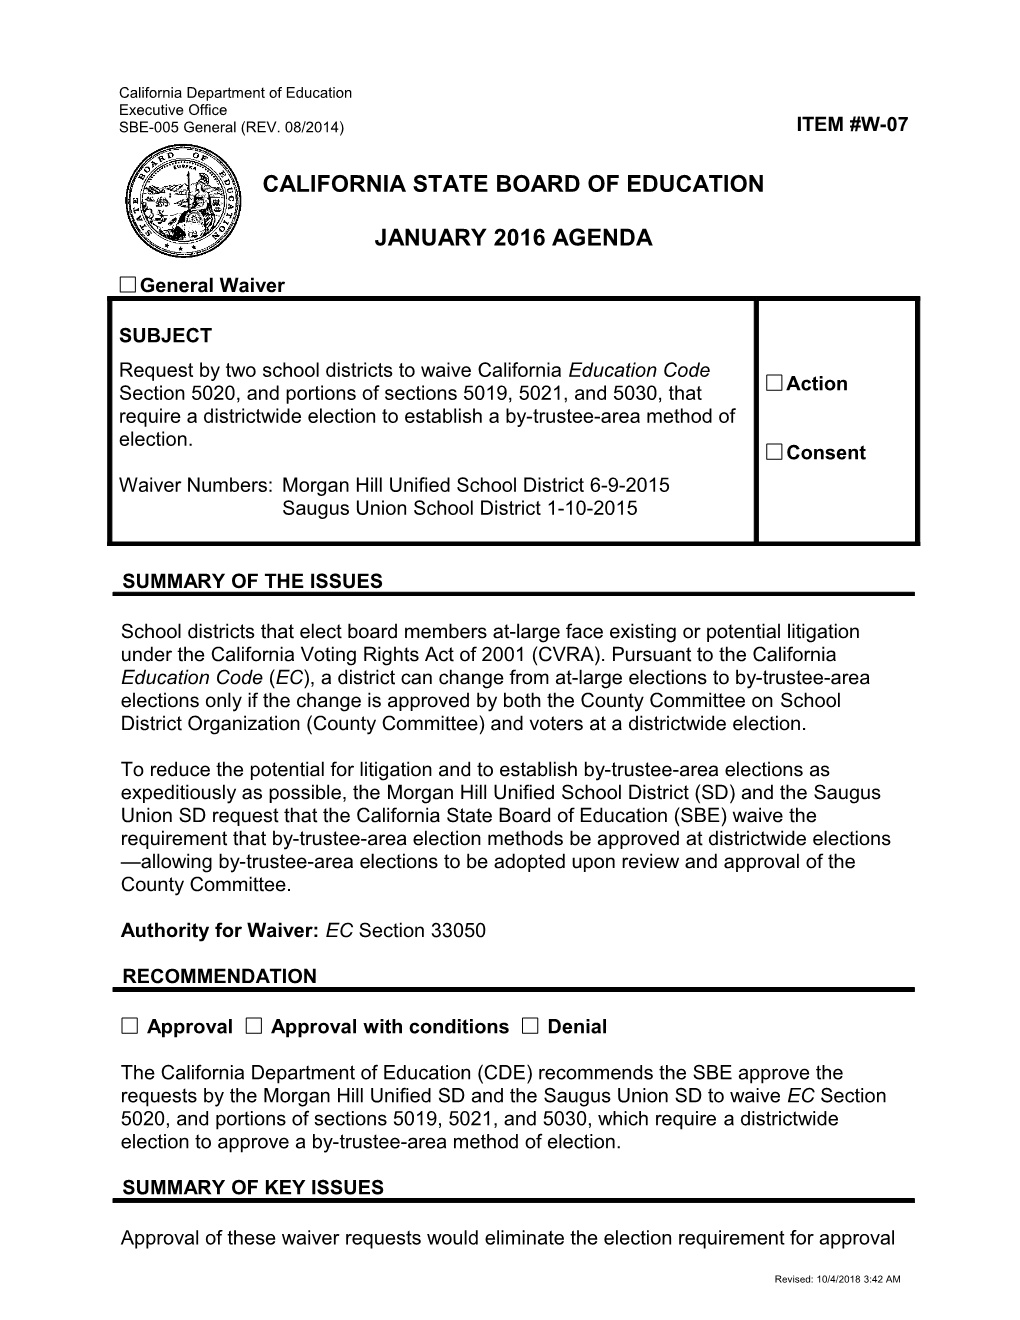 January 2016 Waiver Item W-07 - Meeting Agendas (CA State Board of Education)